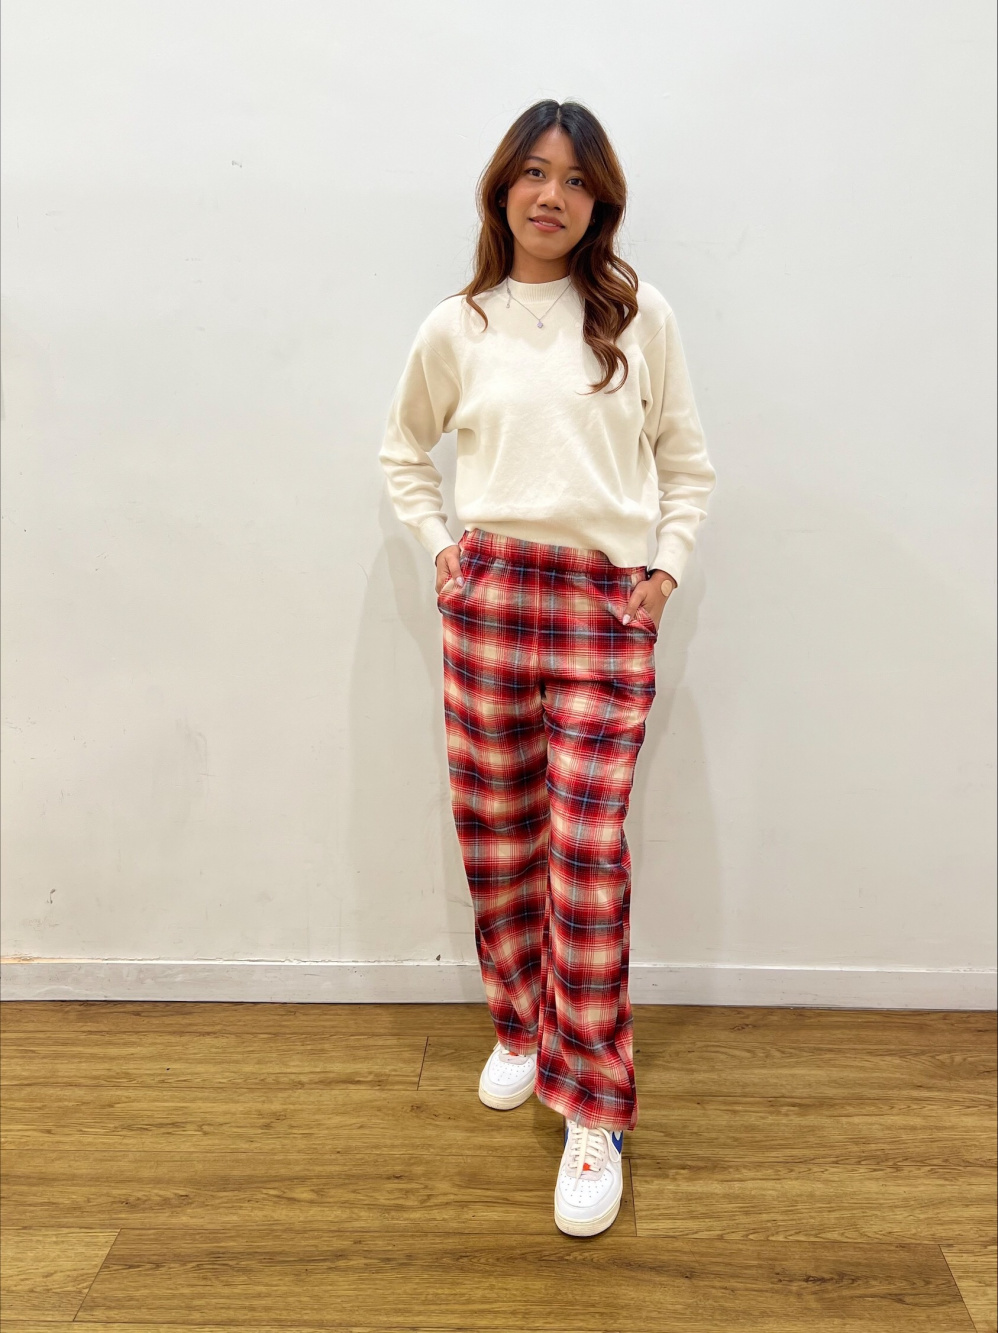 Red Plaid Pajama Pants Outfits For Women (2 ideas & outfits)